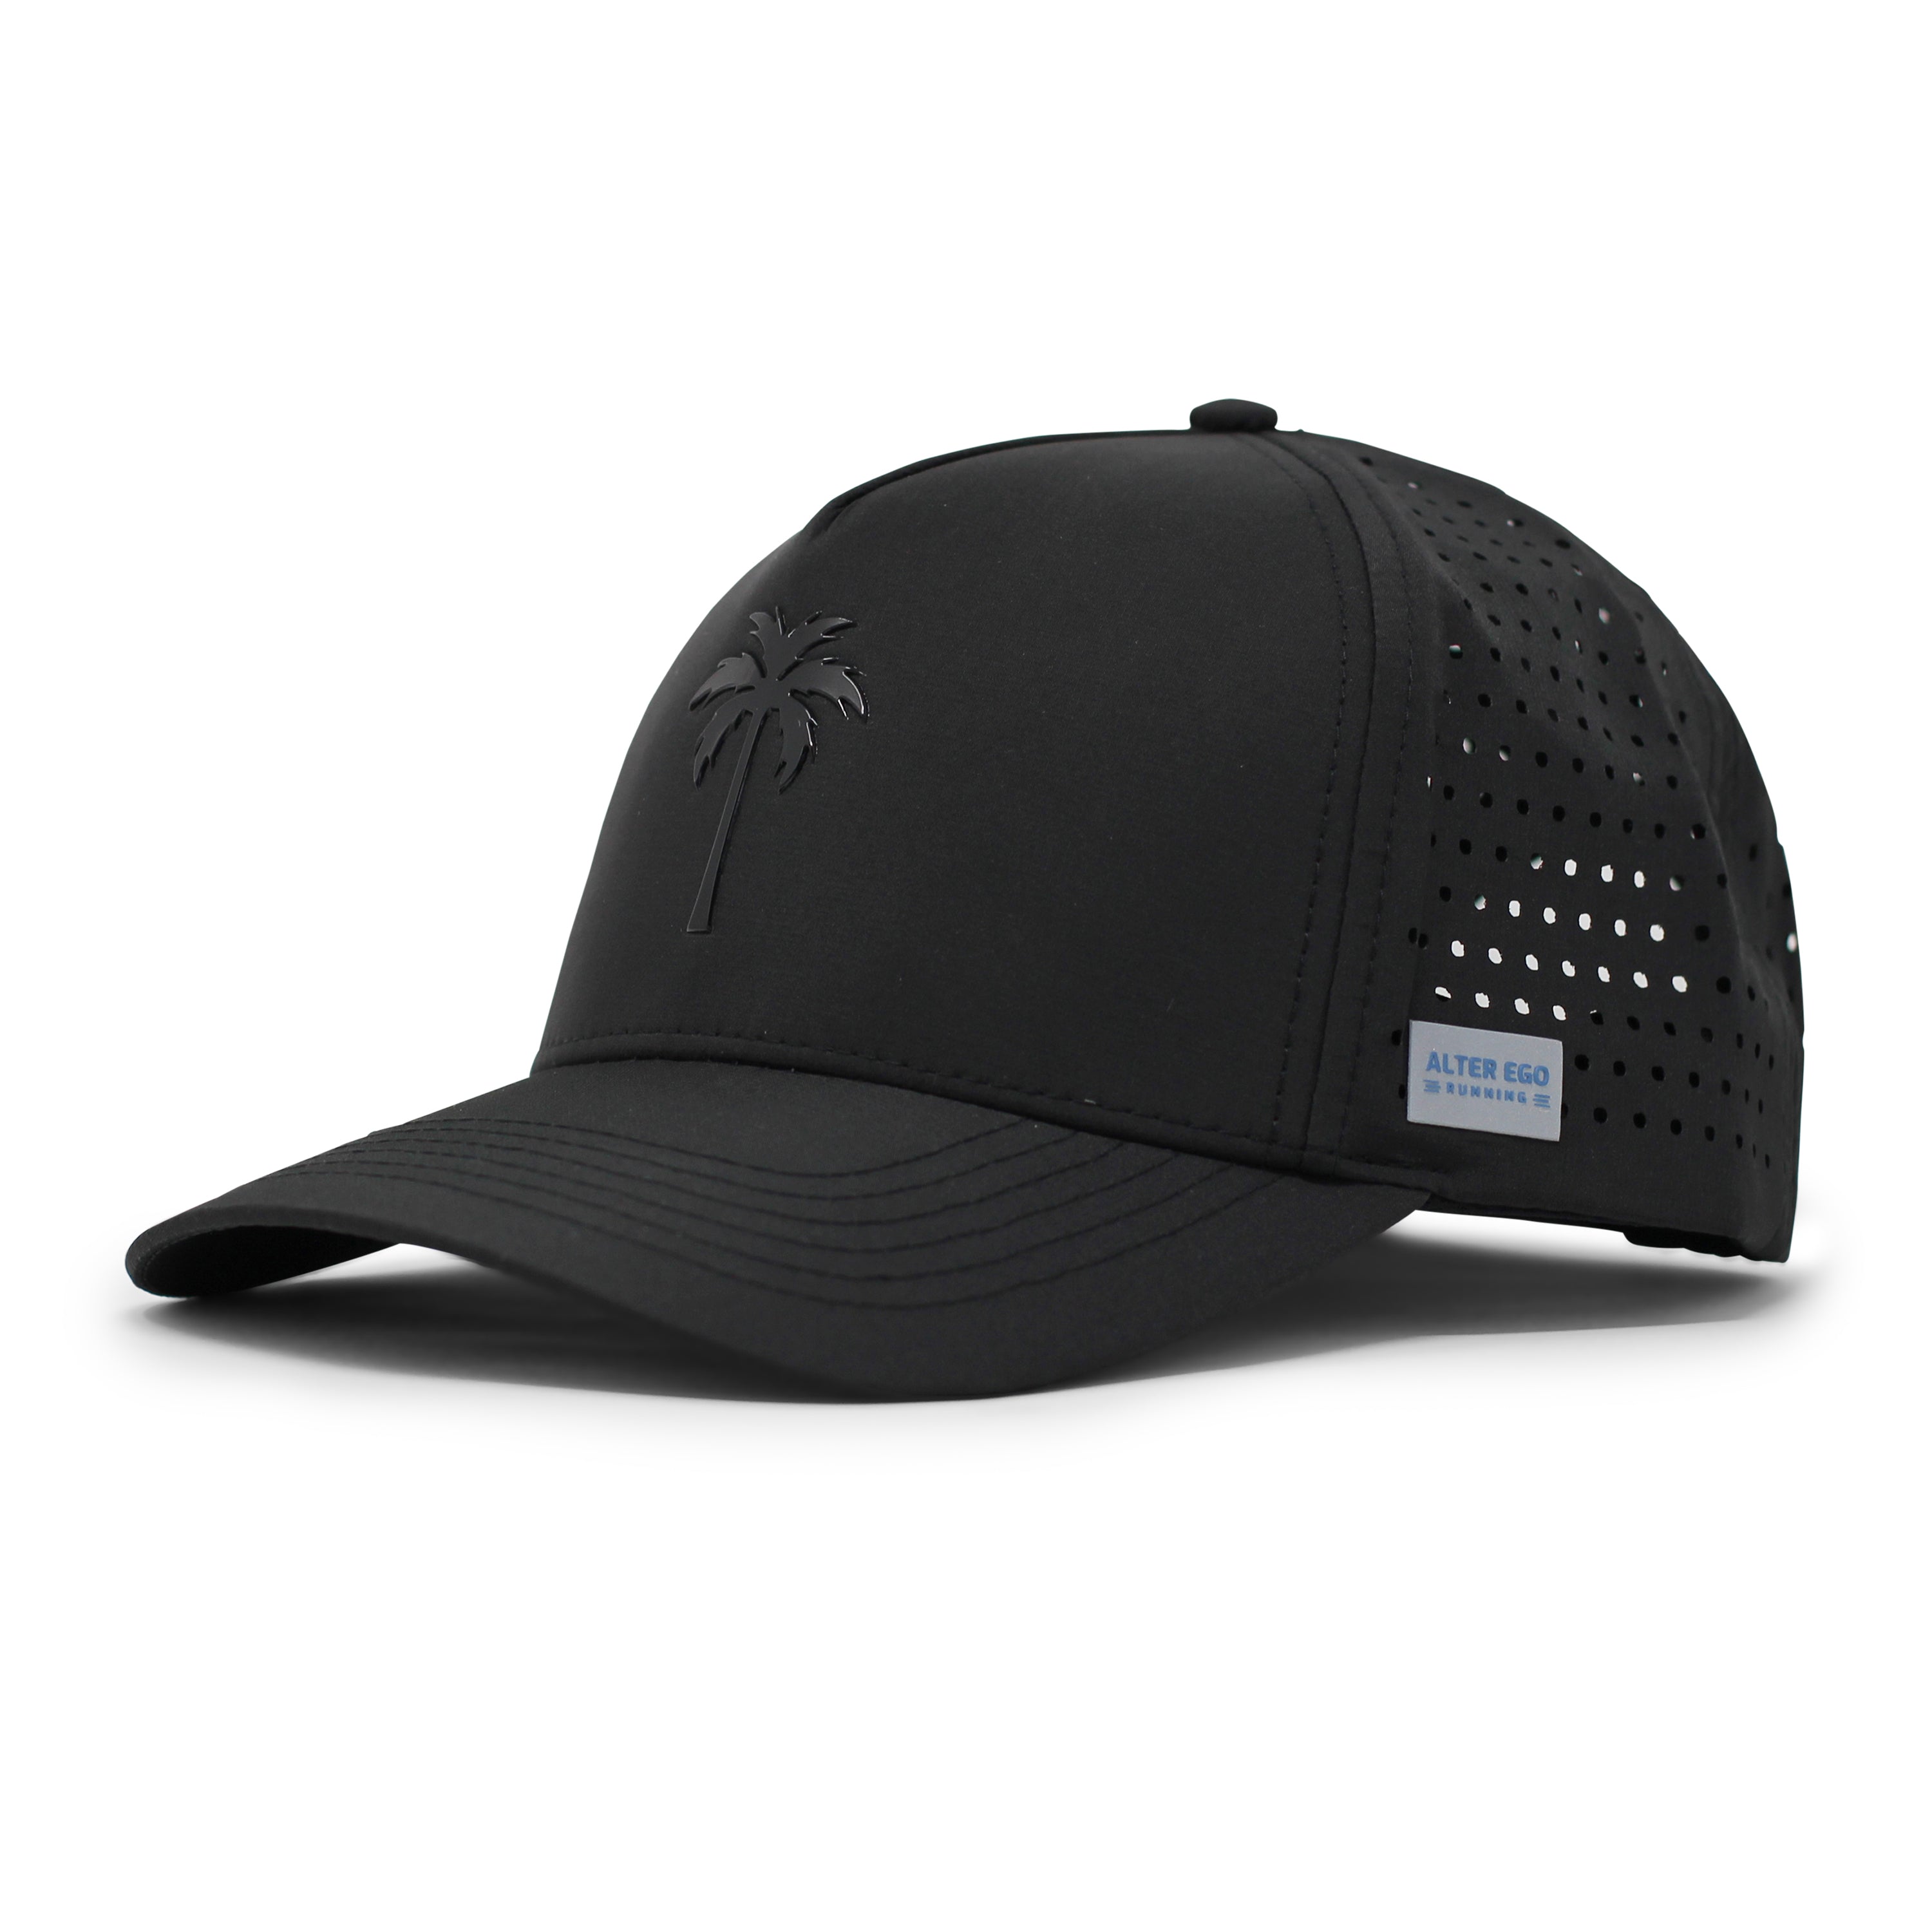 ALL HATS – Tagged men's – Alter Ego Running